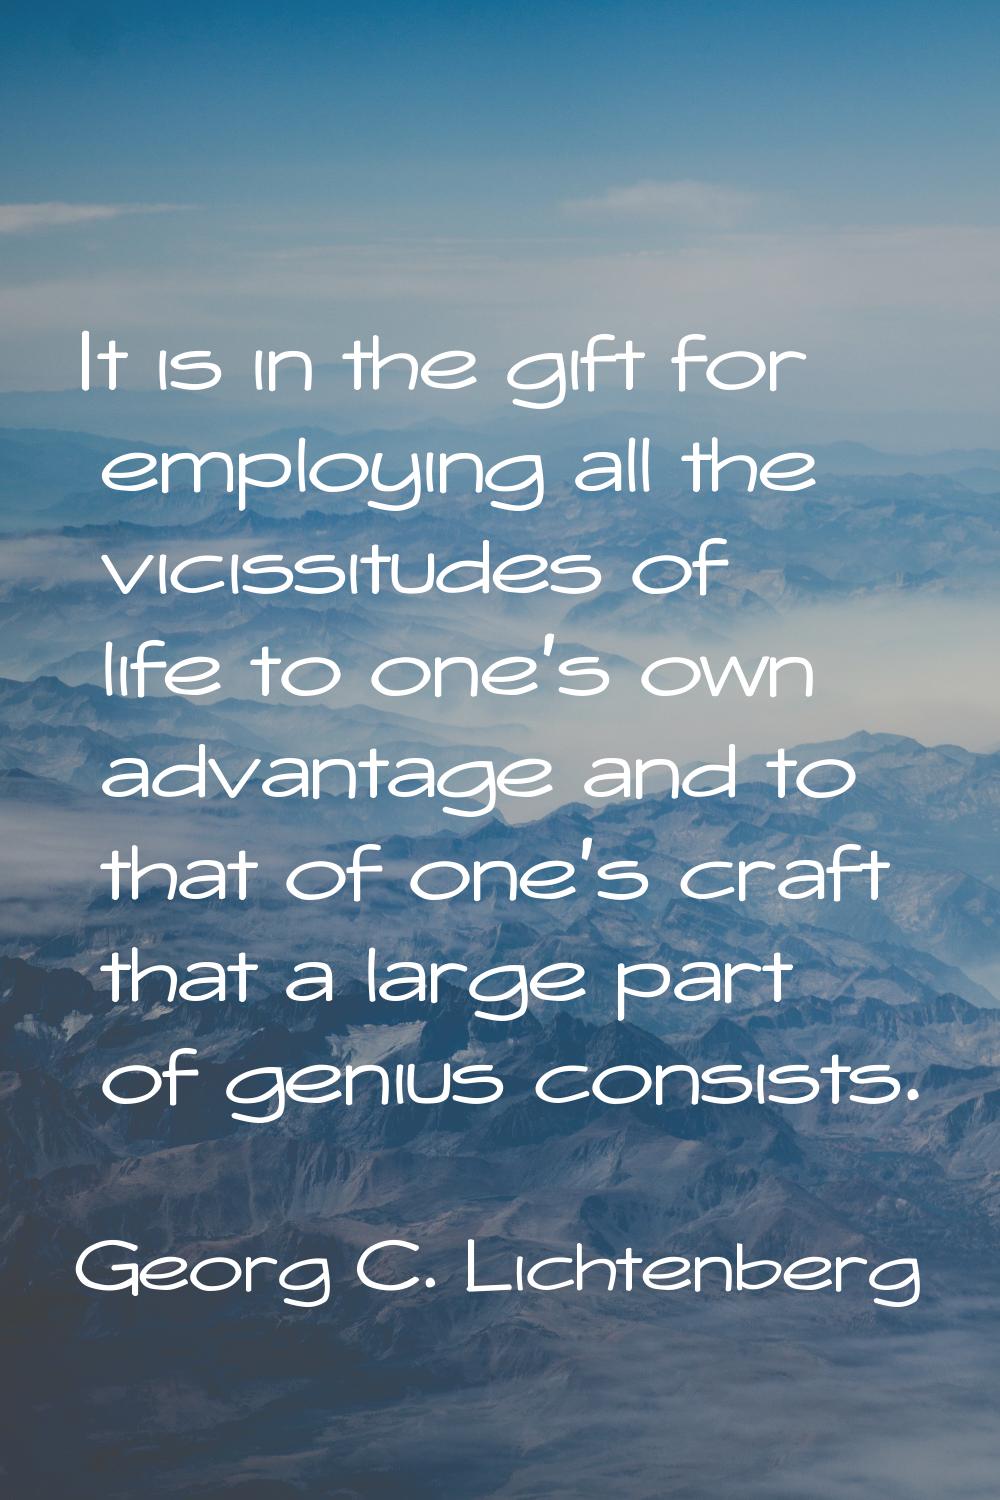 It is in the gift for employing all the vicissitudes of life to one's own advantage and to that of 